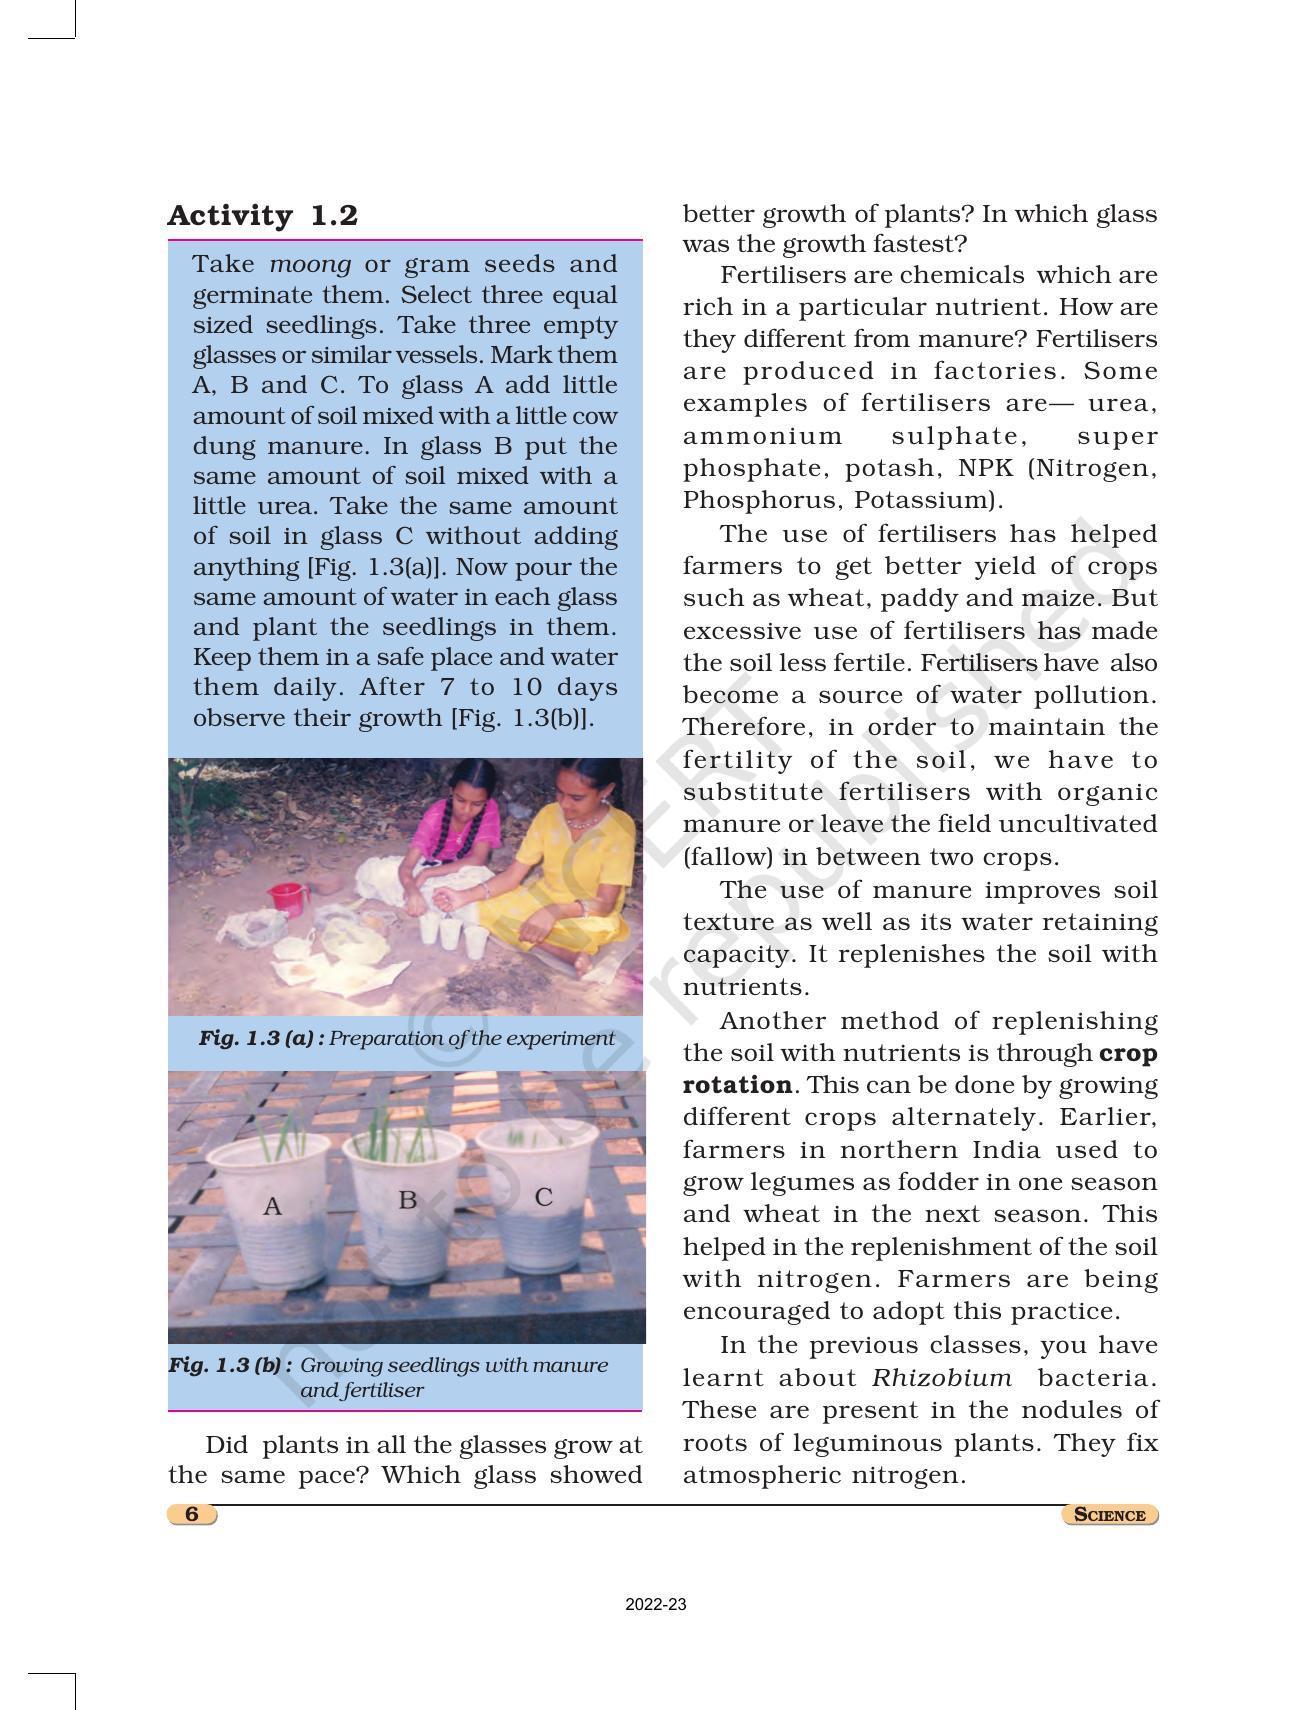 NCERT Book for Class 8 Science Chapter 1 Crop Production and Management - Page 6